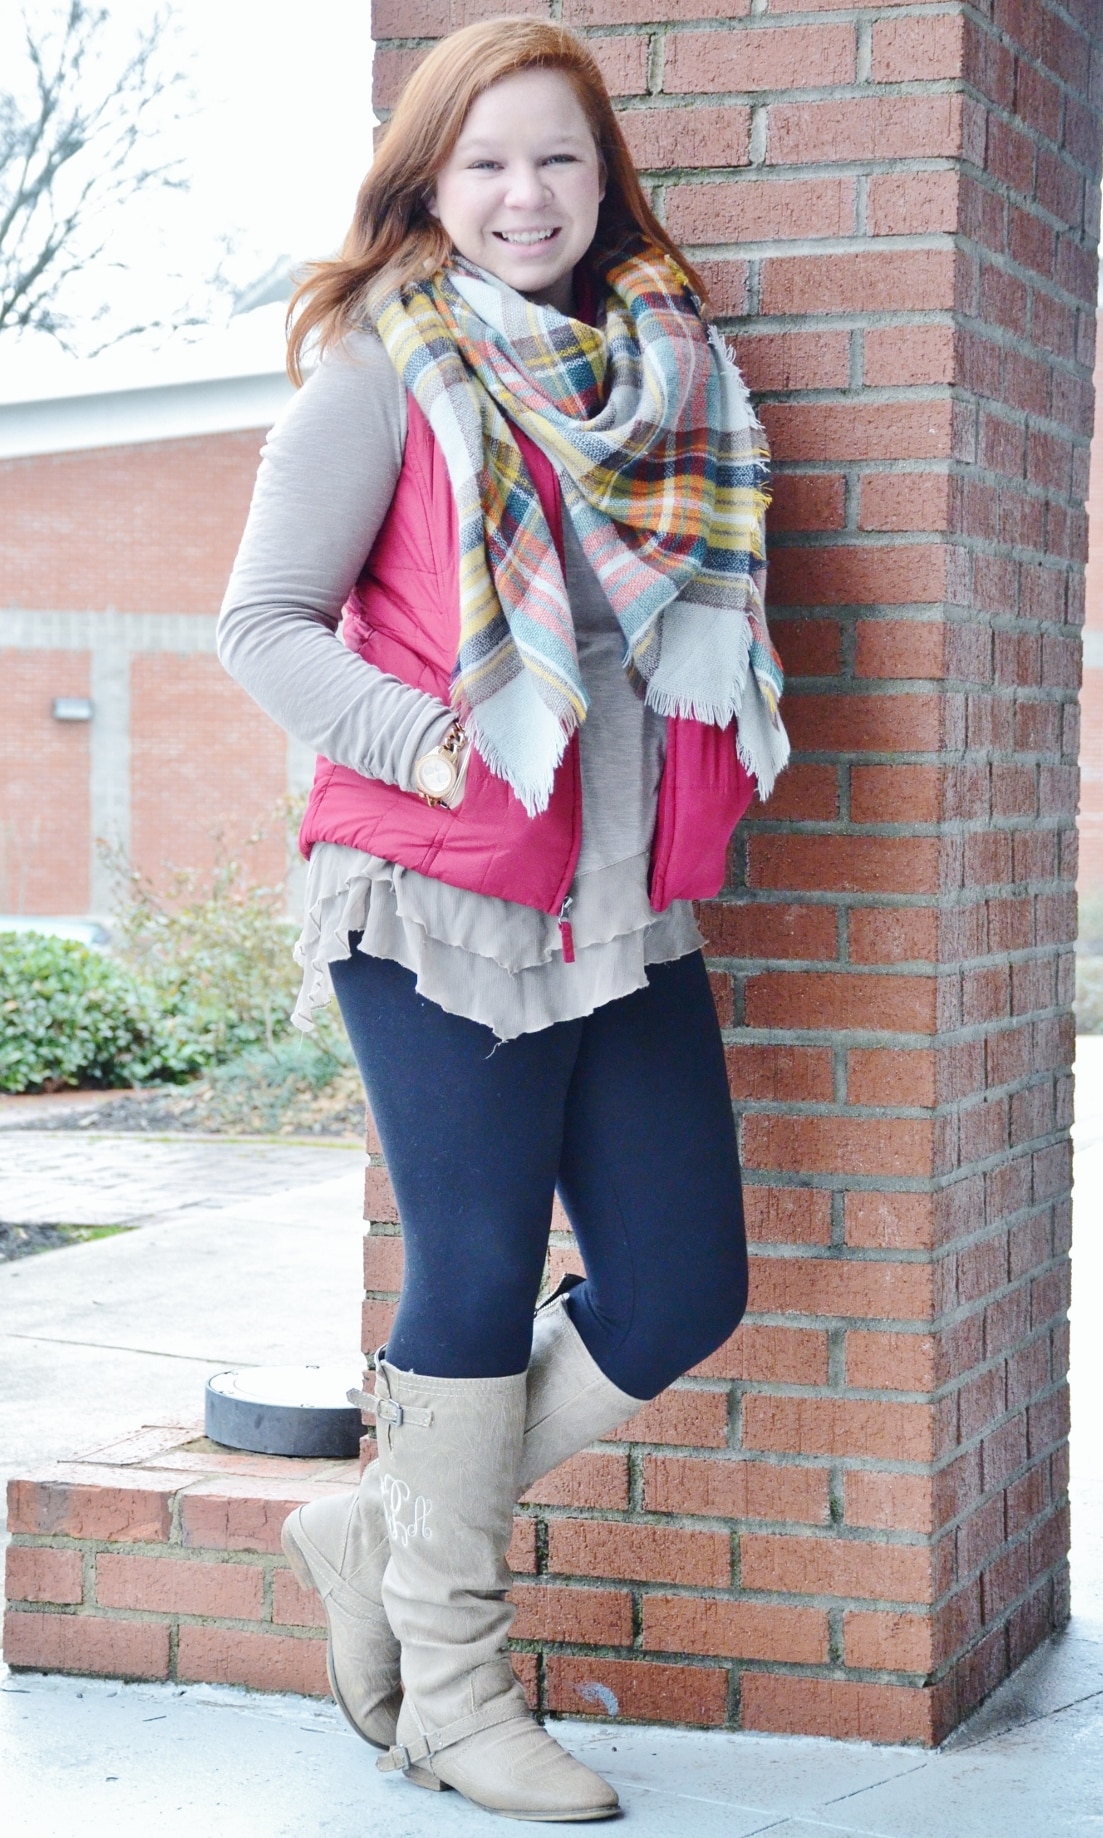 Carson Parnell knows just what to wear when it comes to staying warm. At first glance, it's hard to not notice the multi-colored blanket scarf from Girly Girl Boutique that matches her monogrammed winter boots from Almost Pink. And to put the look a